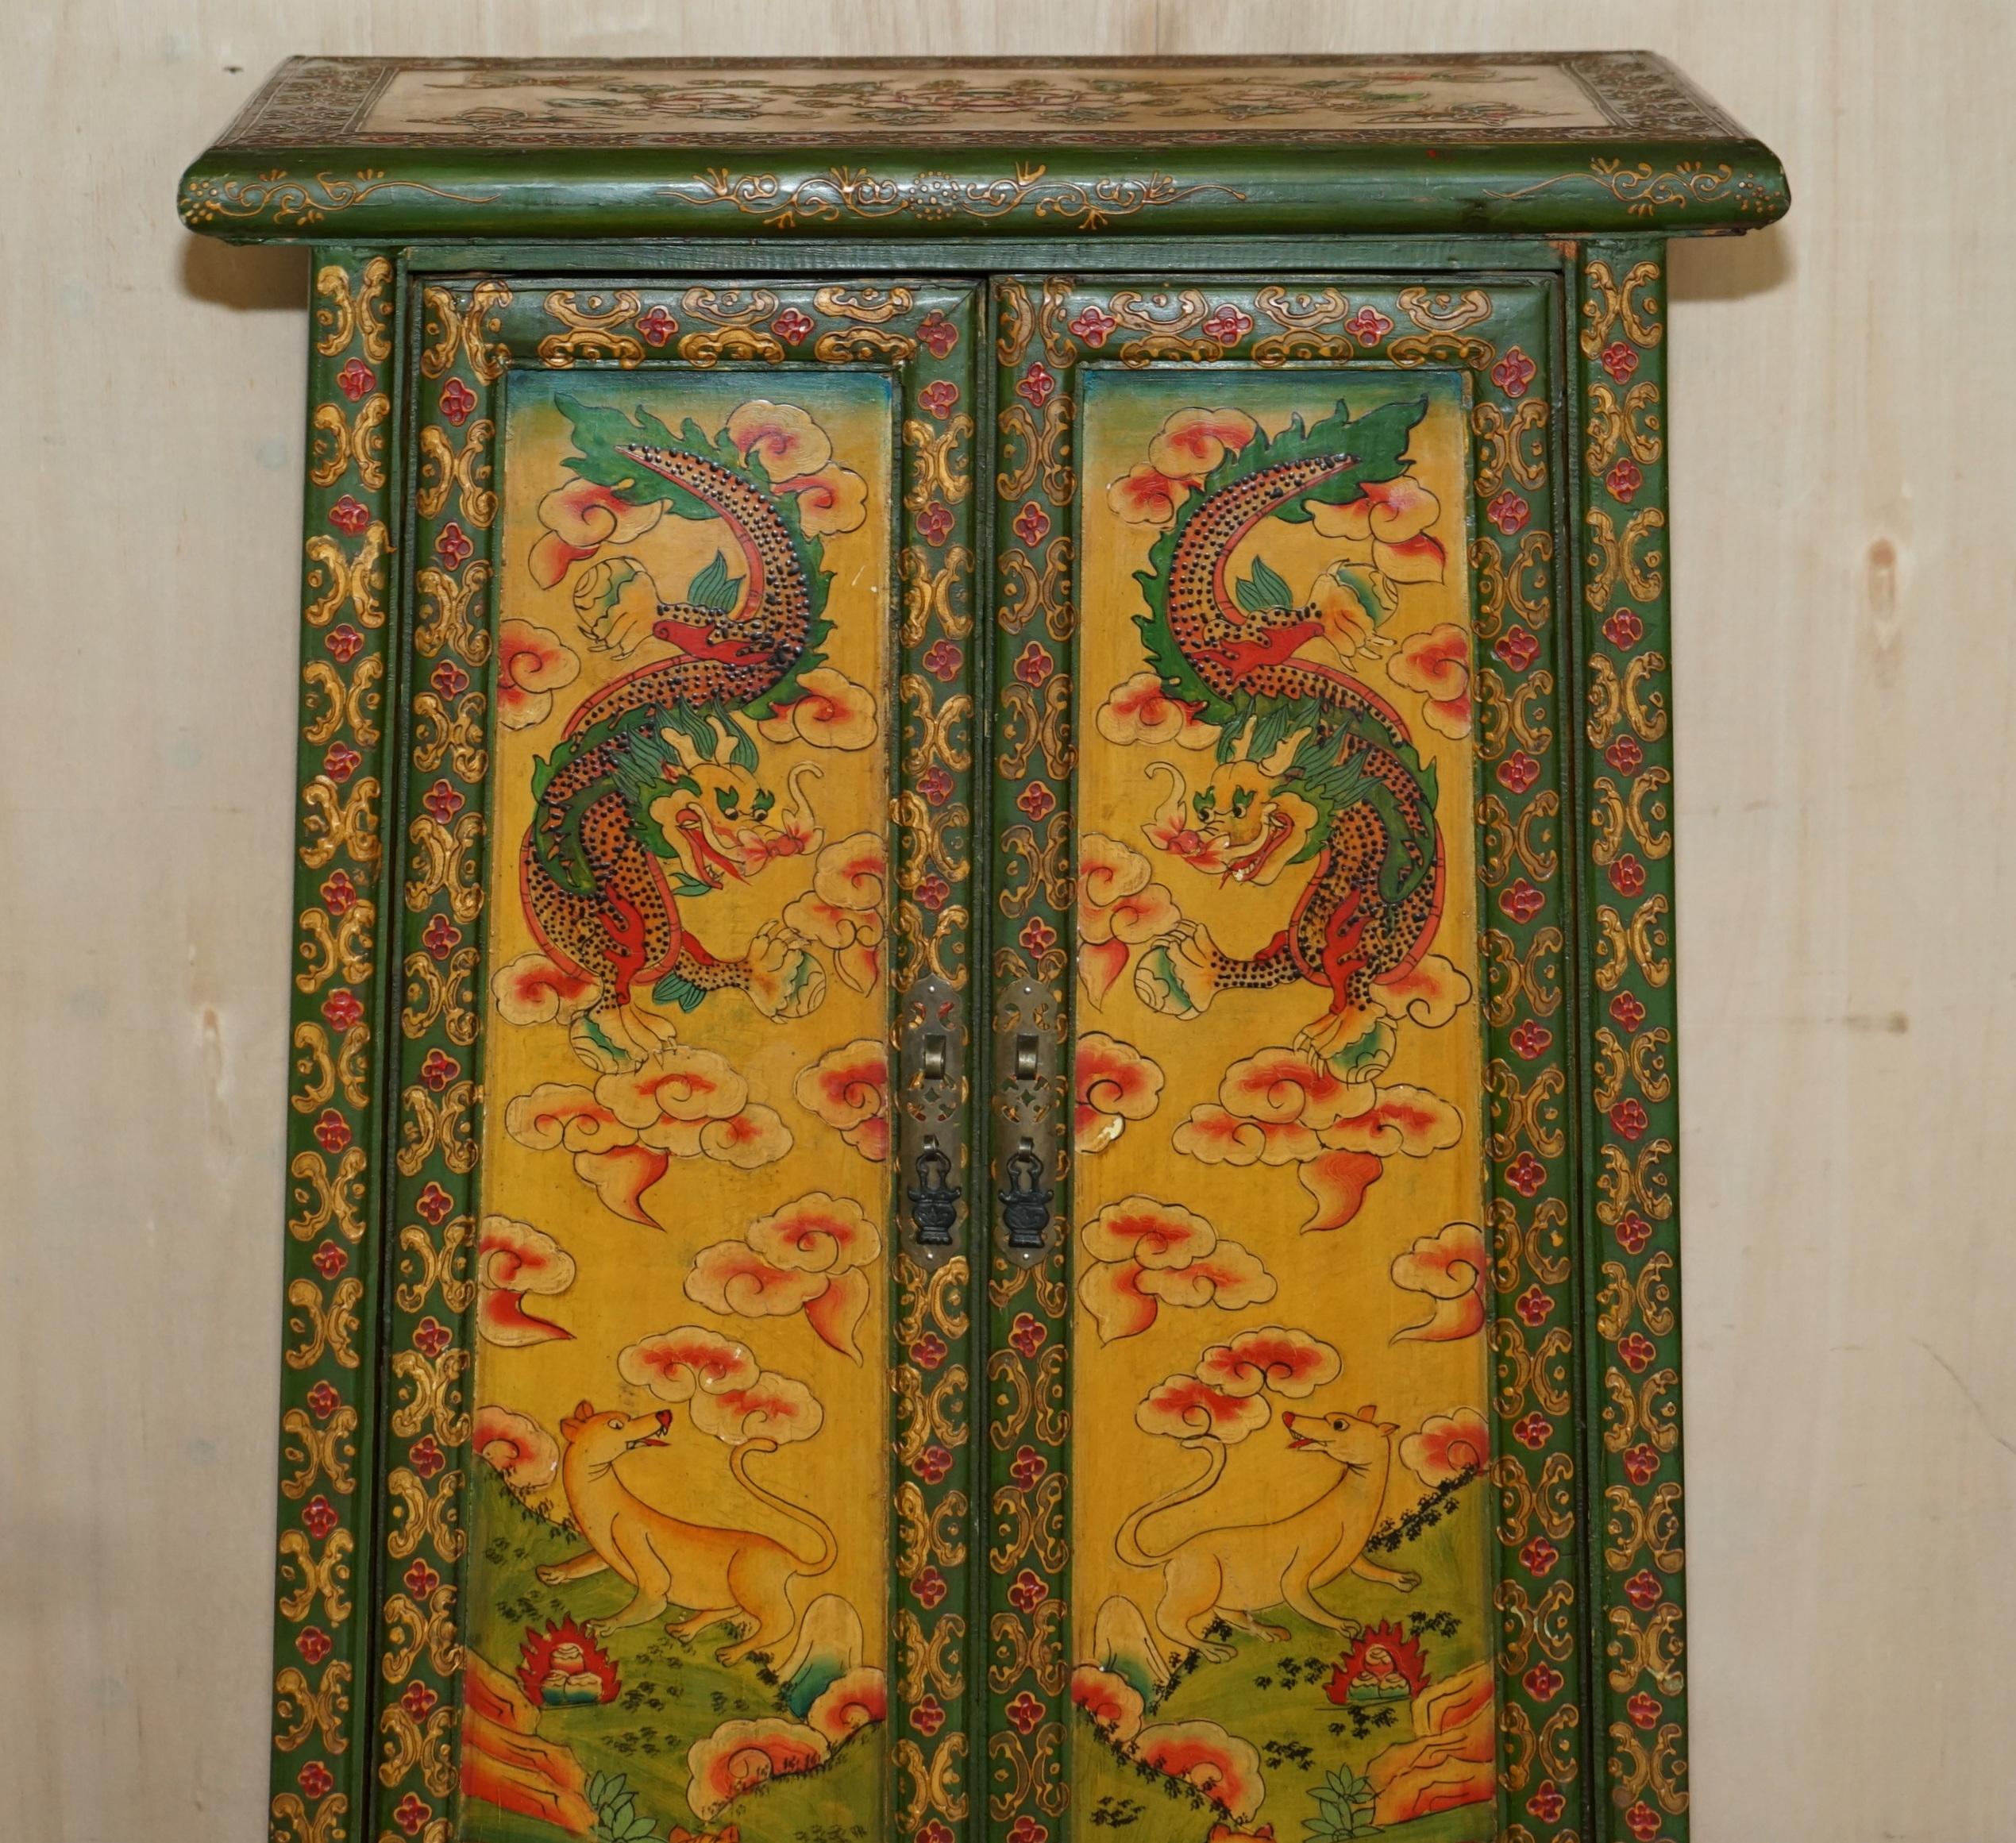 Chinese Export Antique Chinese Hand Painted Dragon & Rural Scene Side Cabinet Cupboard Shelves